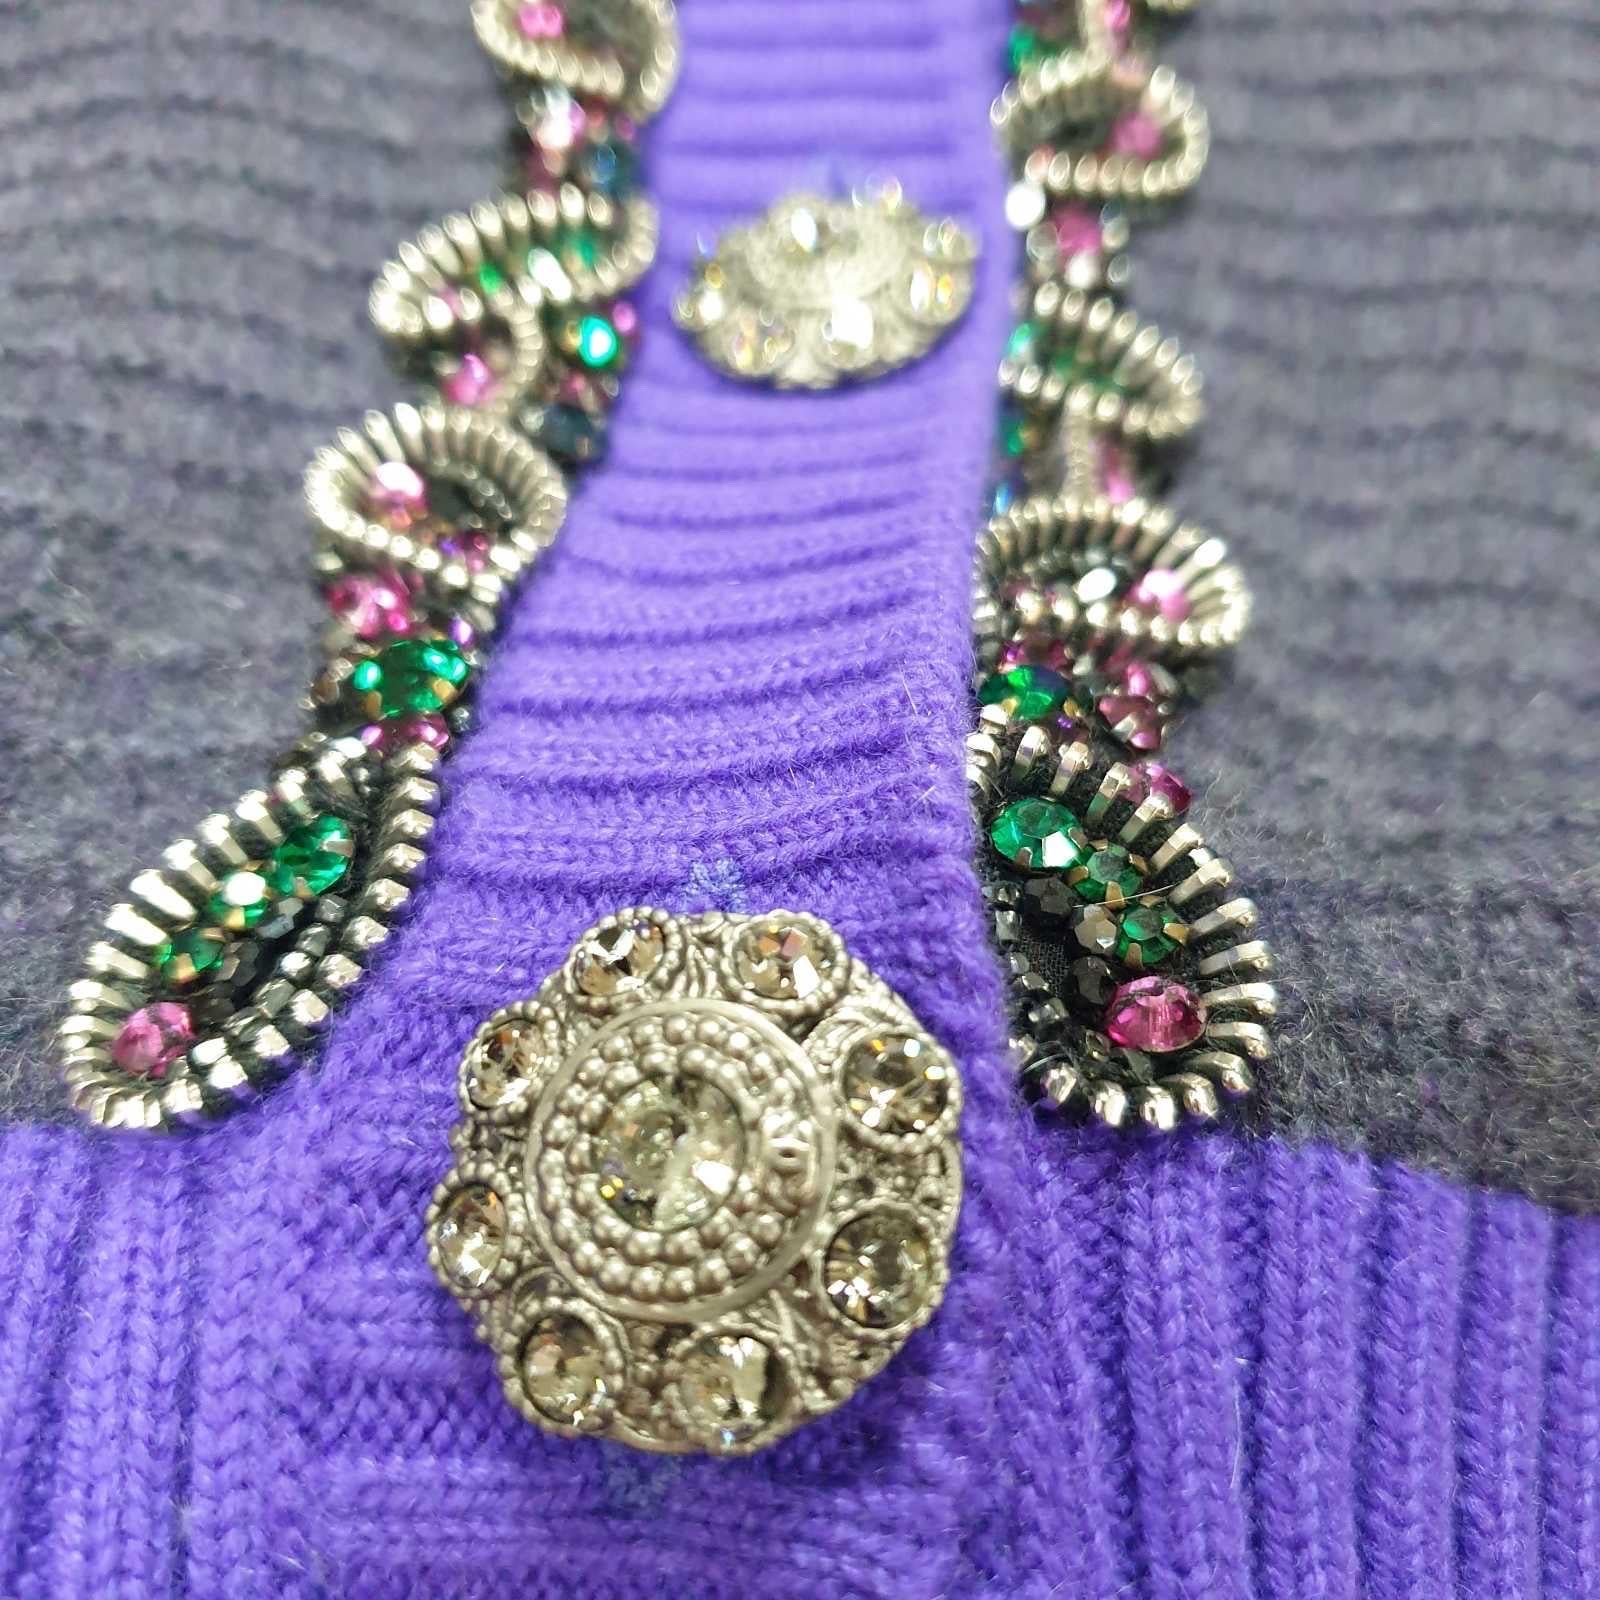 Exquisite Chanel bejeweled cashmere cardigan from Metiers d'Art ''Paris - London'' Collection.

Masterpiece buttons embellished with crystals.

Seen On Sarah Jessica Parker.

No size tag, correspond to 38.

No composition tag.